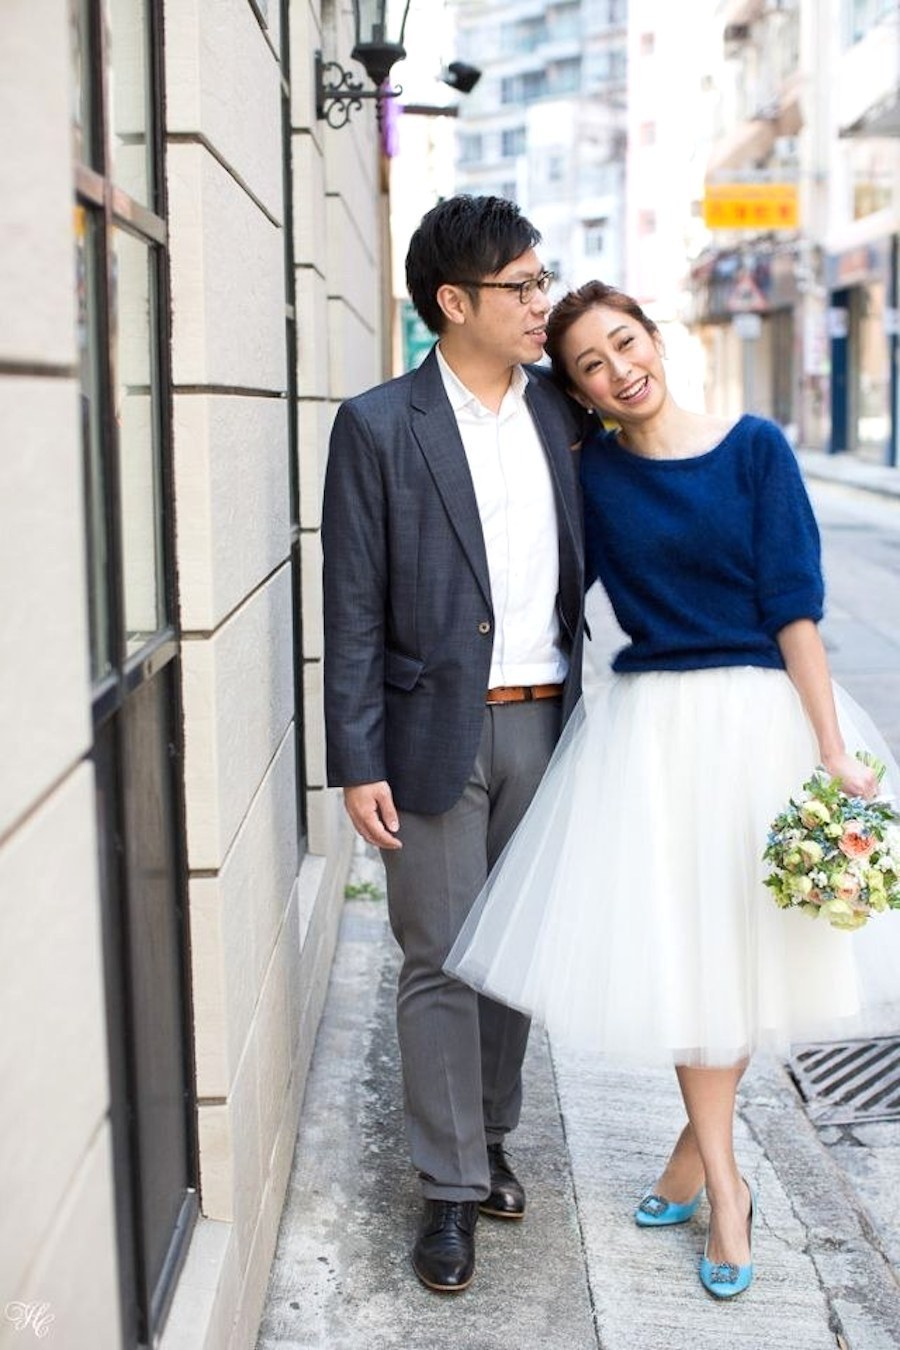 Casual chic couple outfit idea for a courthouse idea. Tulle skirt and blue sweater and heels for good luck and a pop of color. // See more: 20 Stunning Civil Wedding Outfit Ideas to Make it Official In Style. // mysweetengagement.com